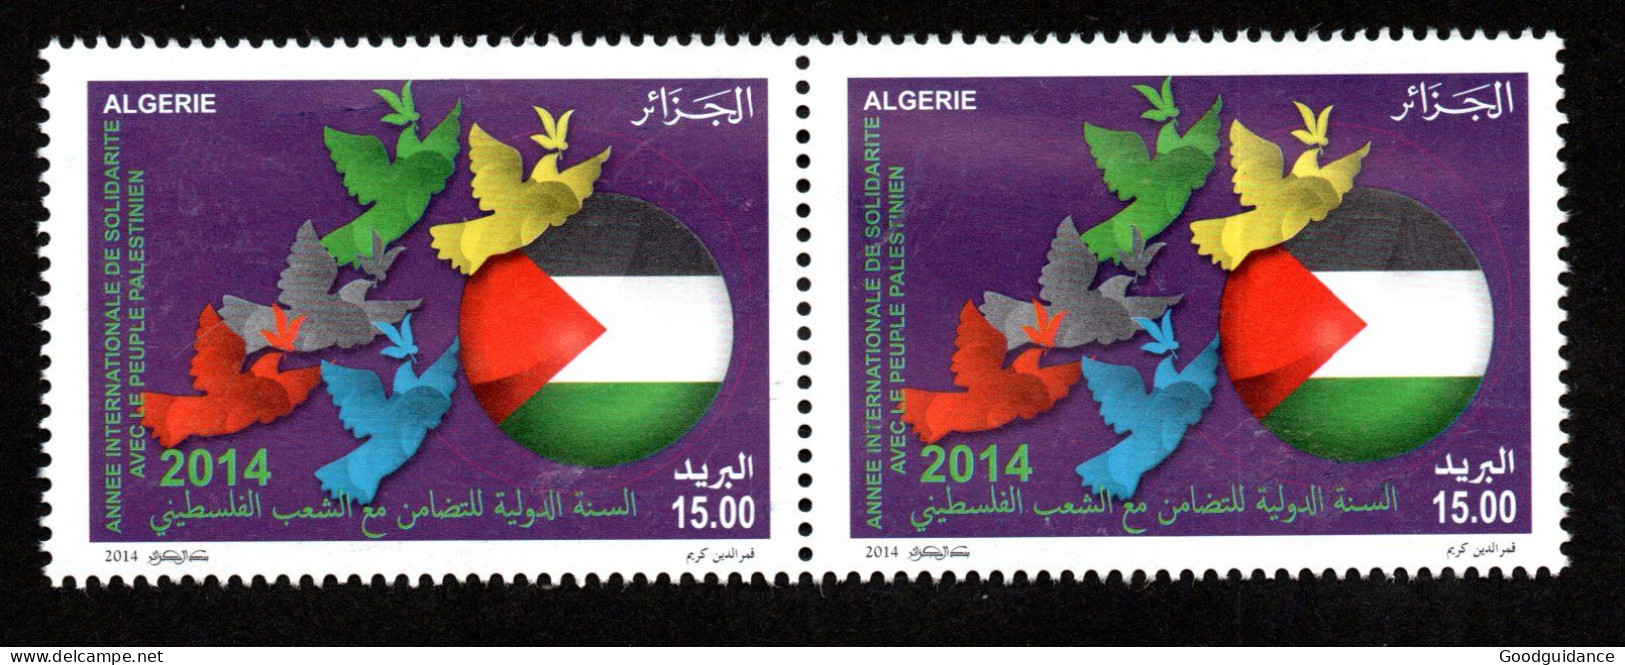 2014- Algeria- International Year Of Solidarity With The Palestinian People - Flag - Dove - Pair - Complete Set 1v.MNH** - Palästina